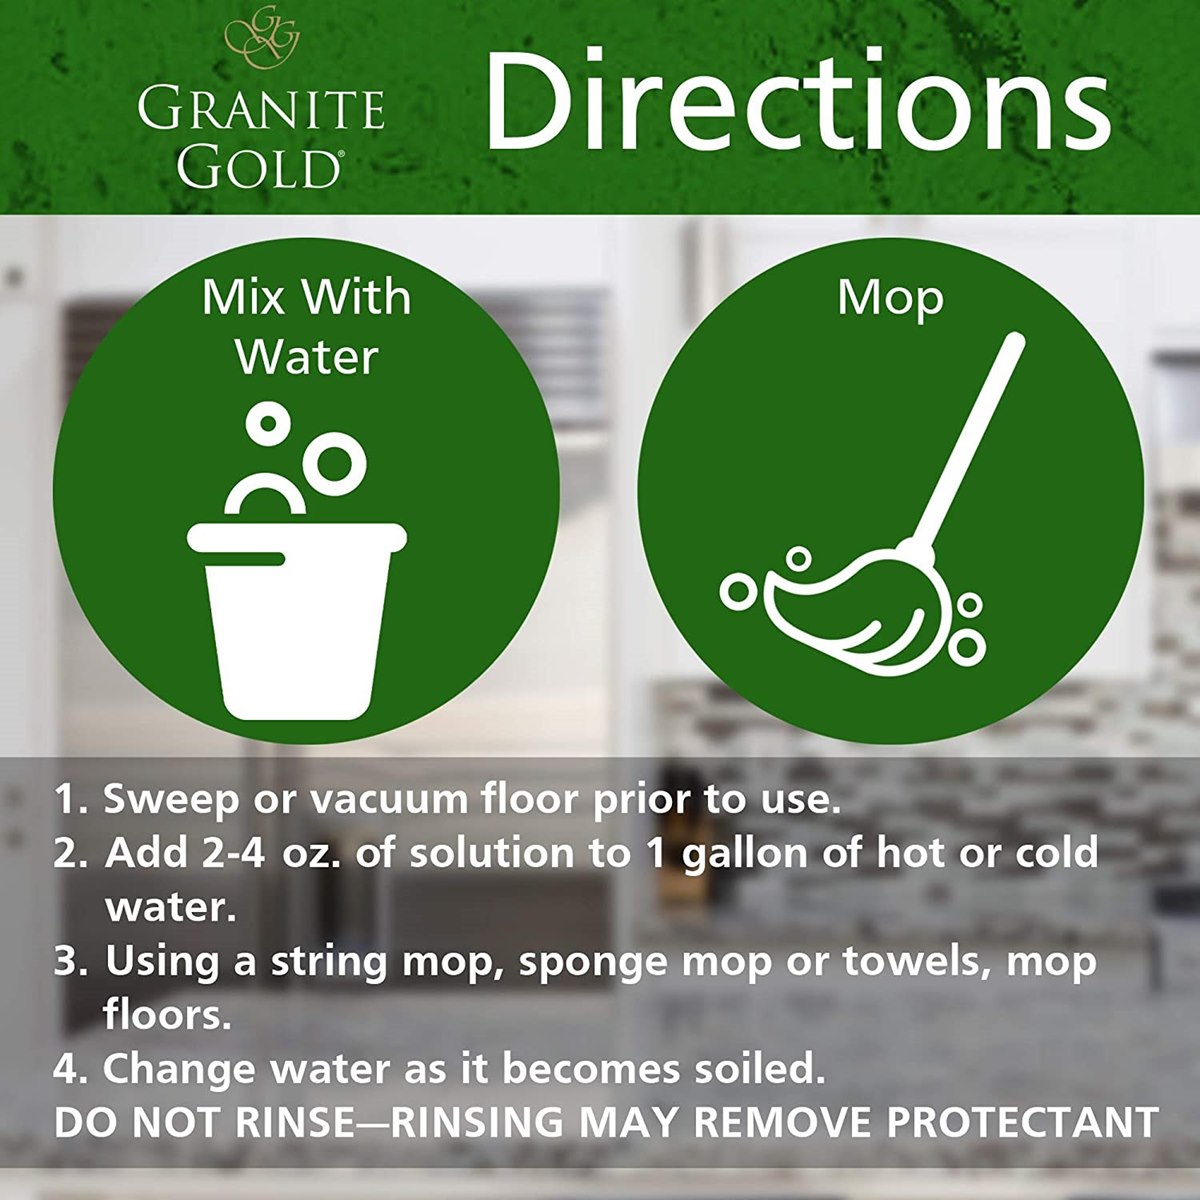 How to Use Granite Gold Stone Floor Cleaner